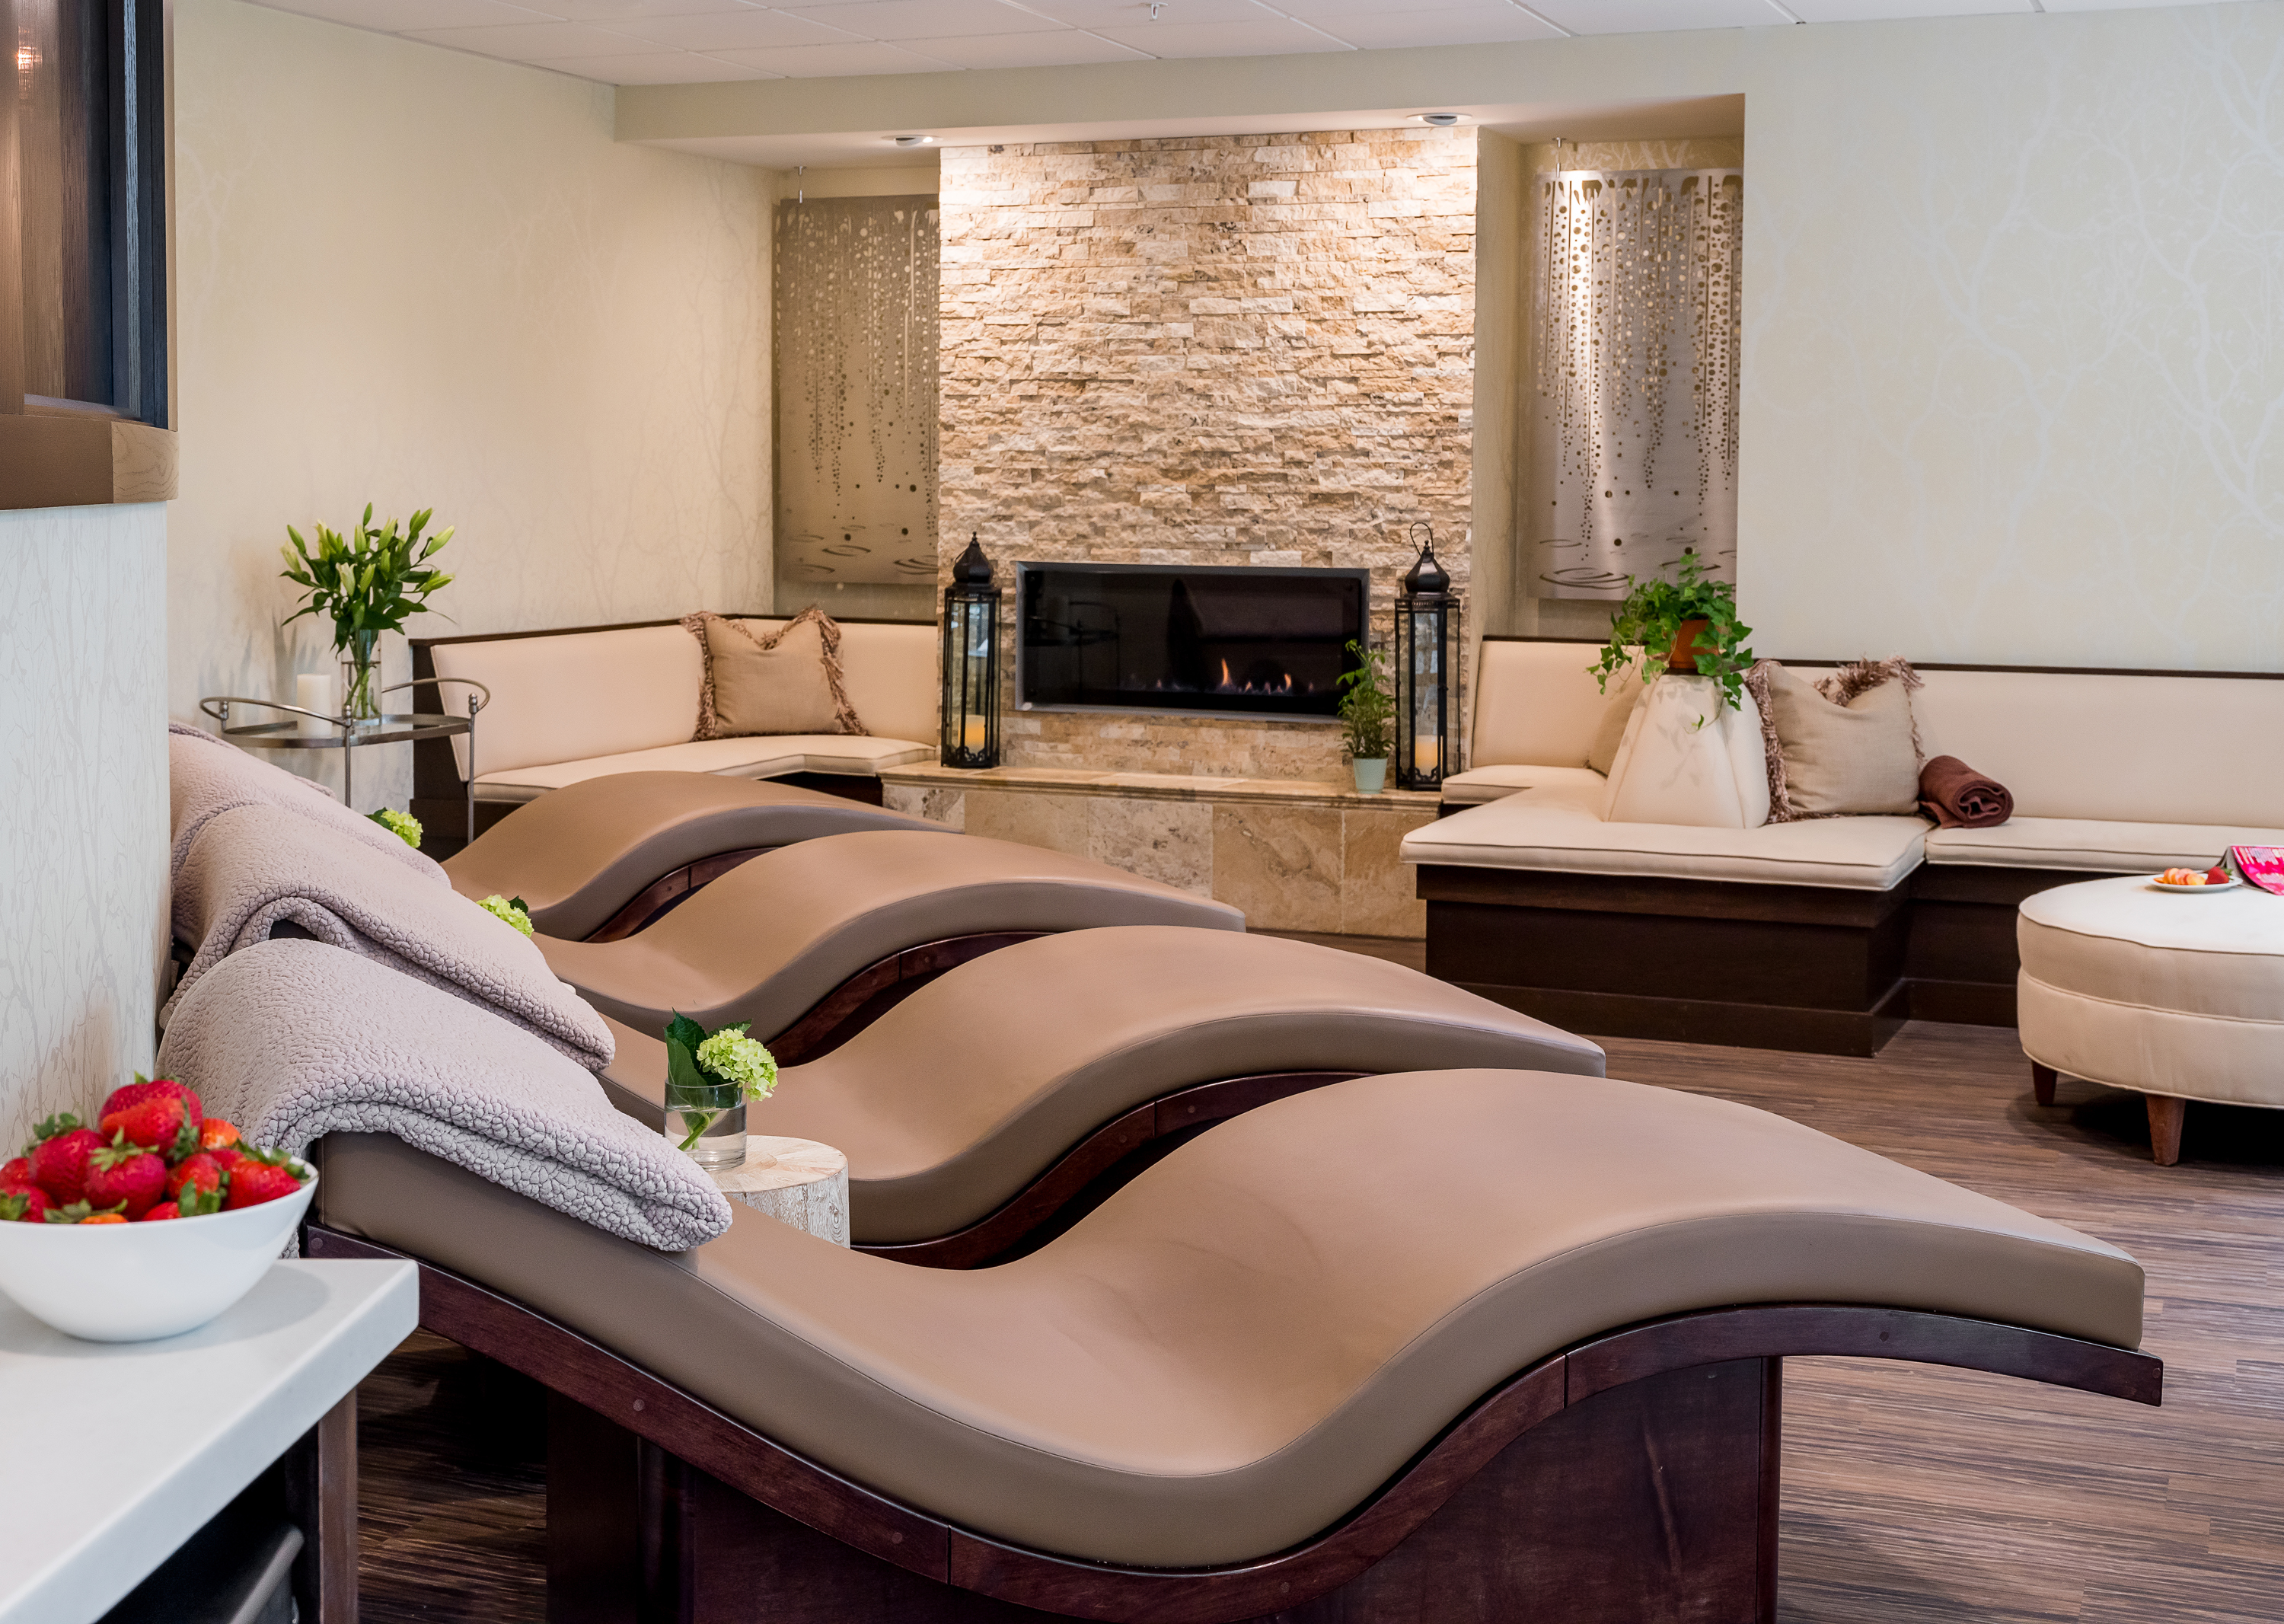 Holidays - Complexions Spa for Beauty & Wellness